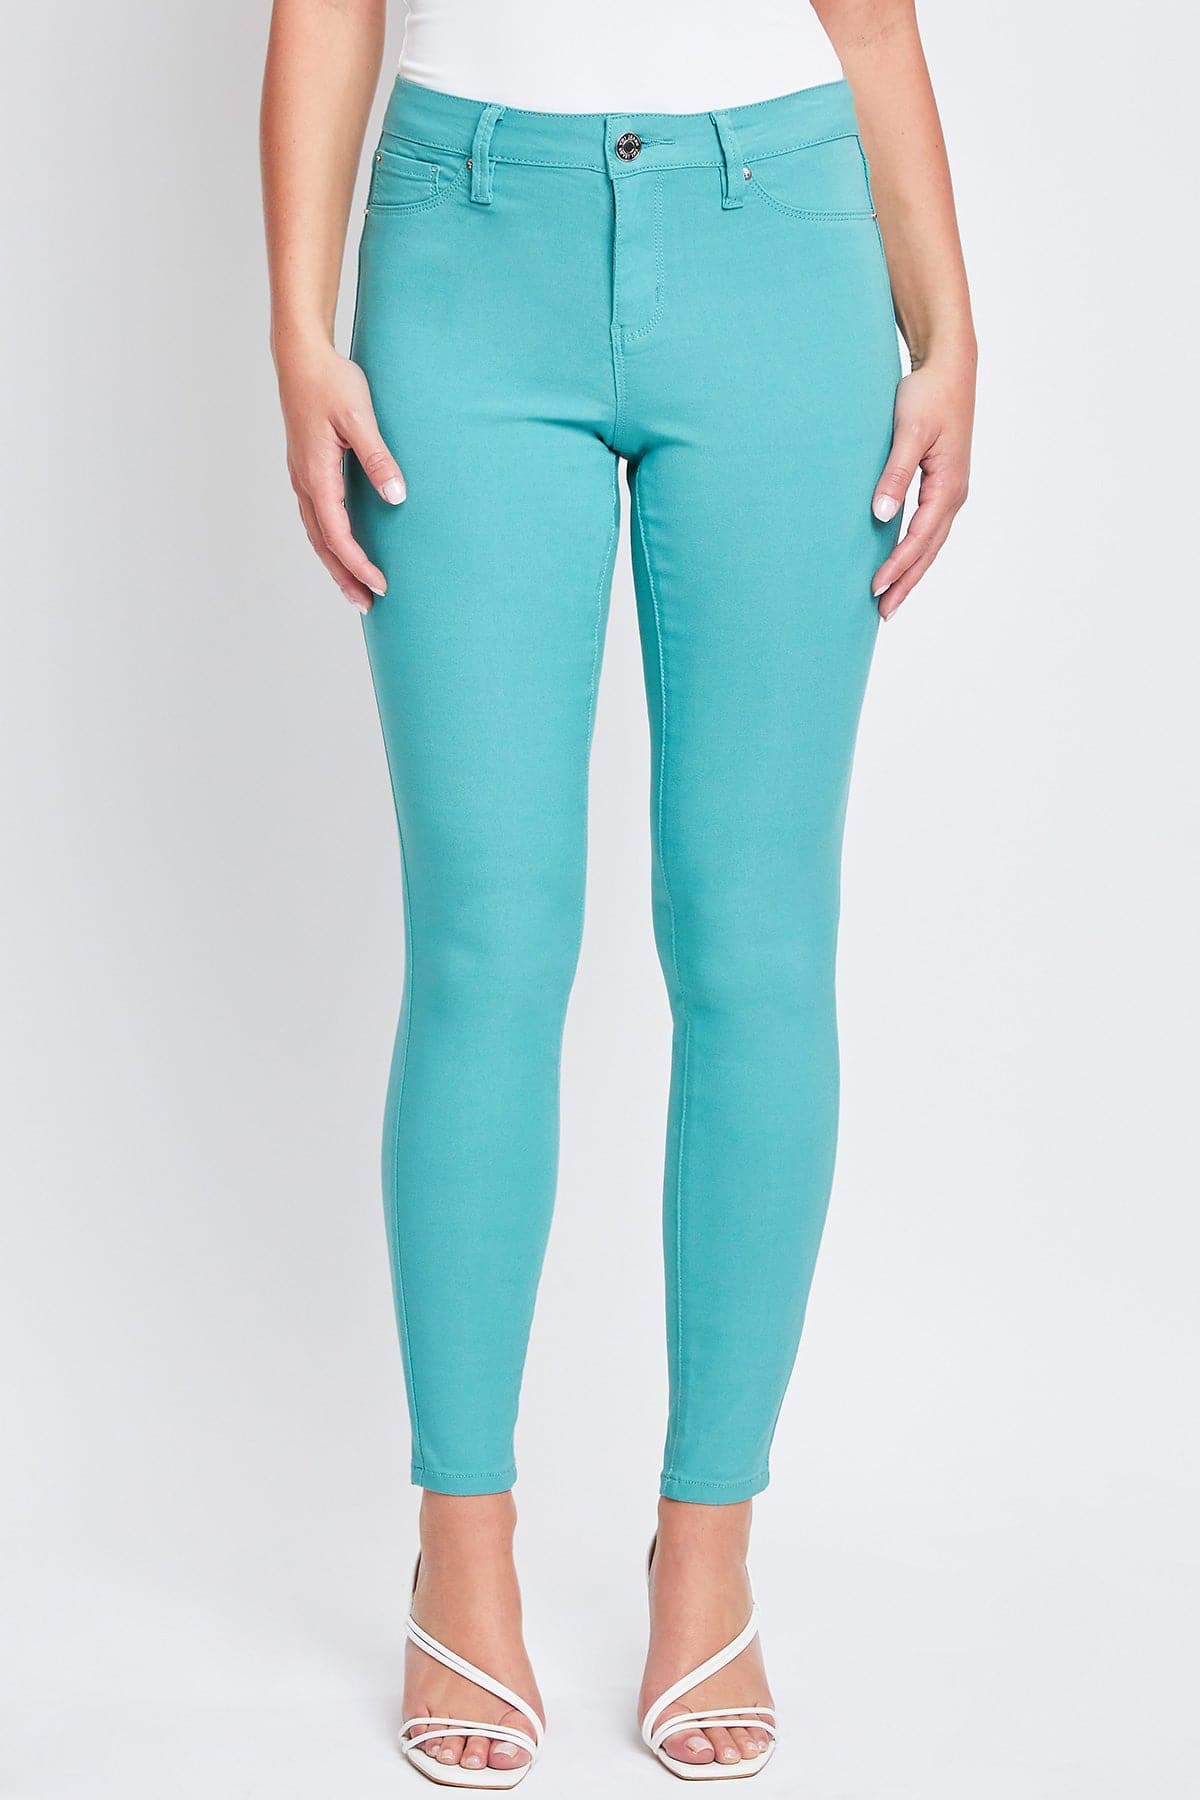 Women's Hyperstretch Forever Color Pants - Bright